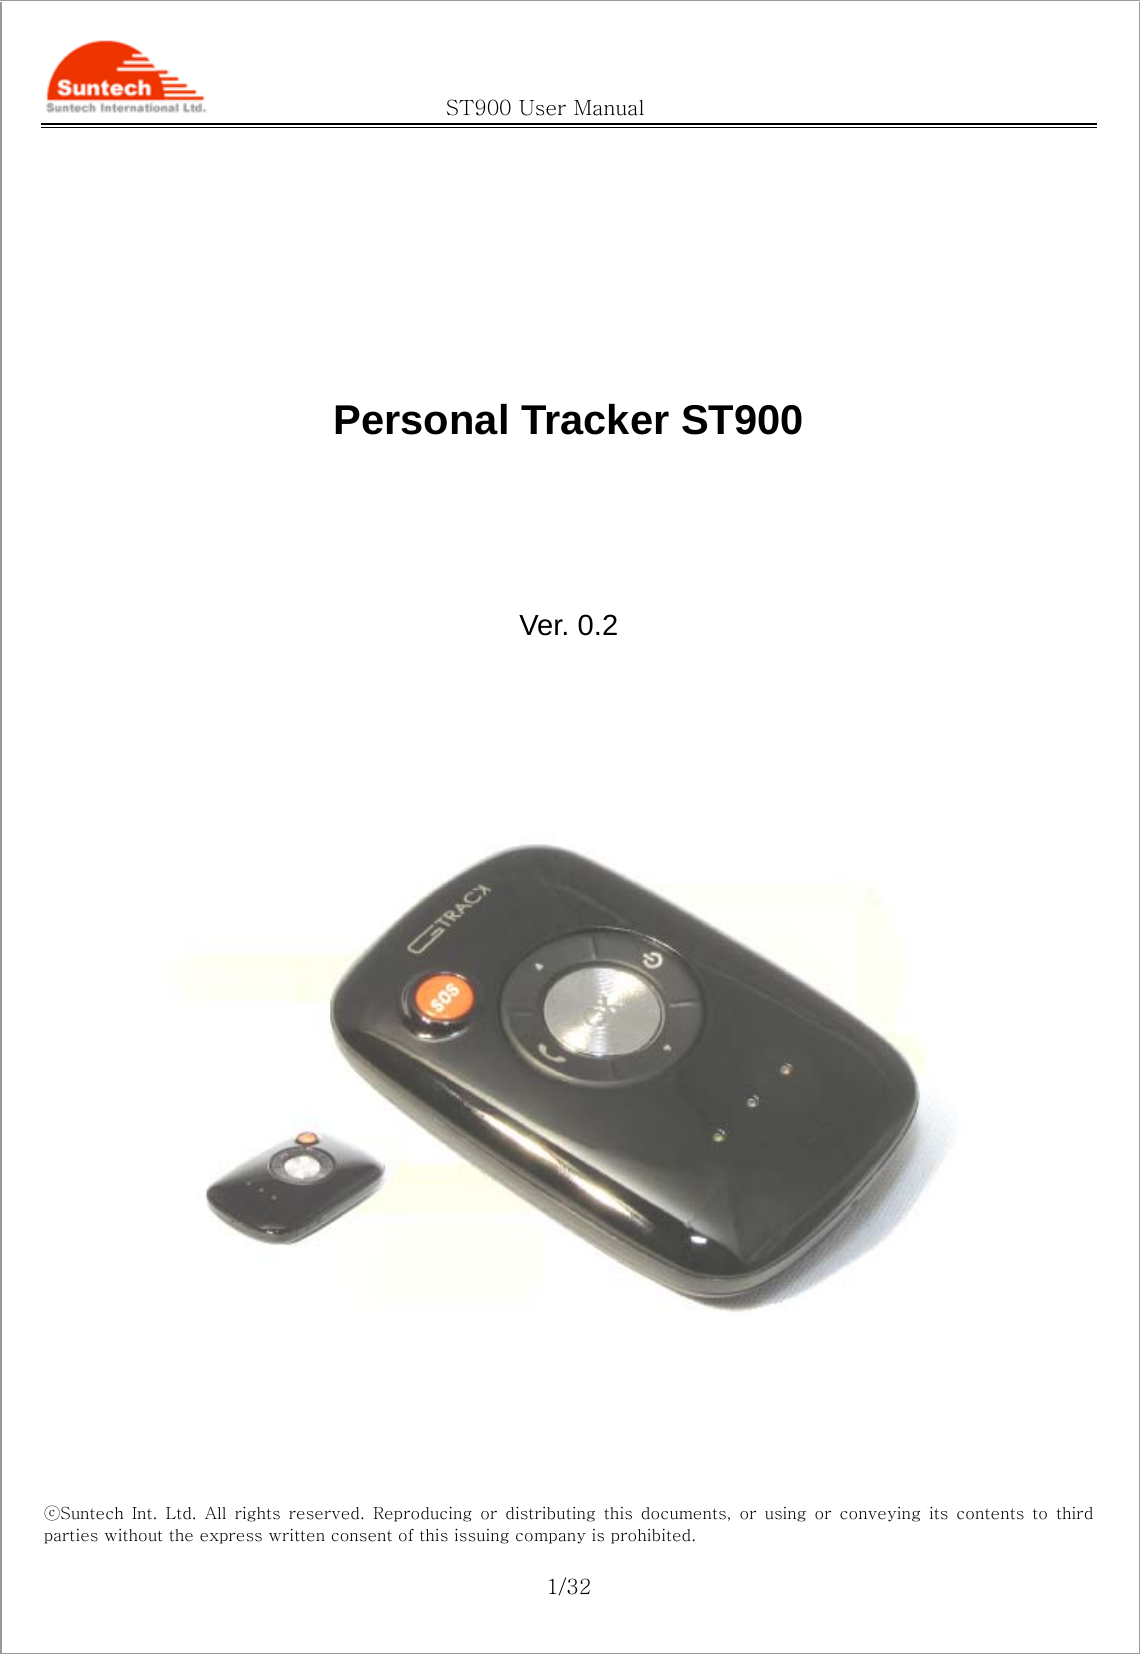                                               ST900 User Manual ⓒSuntech  Int.  Ltd.  All  rights  reserved.  Reproducing  or  distributing this documents, or using or conveying its contents to third parties without the express written consent of this issuing company is prohibited.  1/32      Personal Tracker ST900   Ver. 0.2         